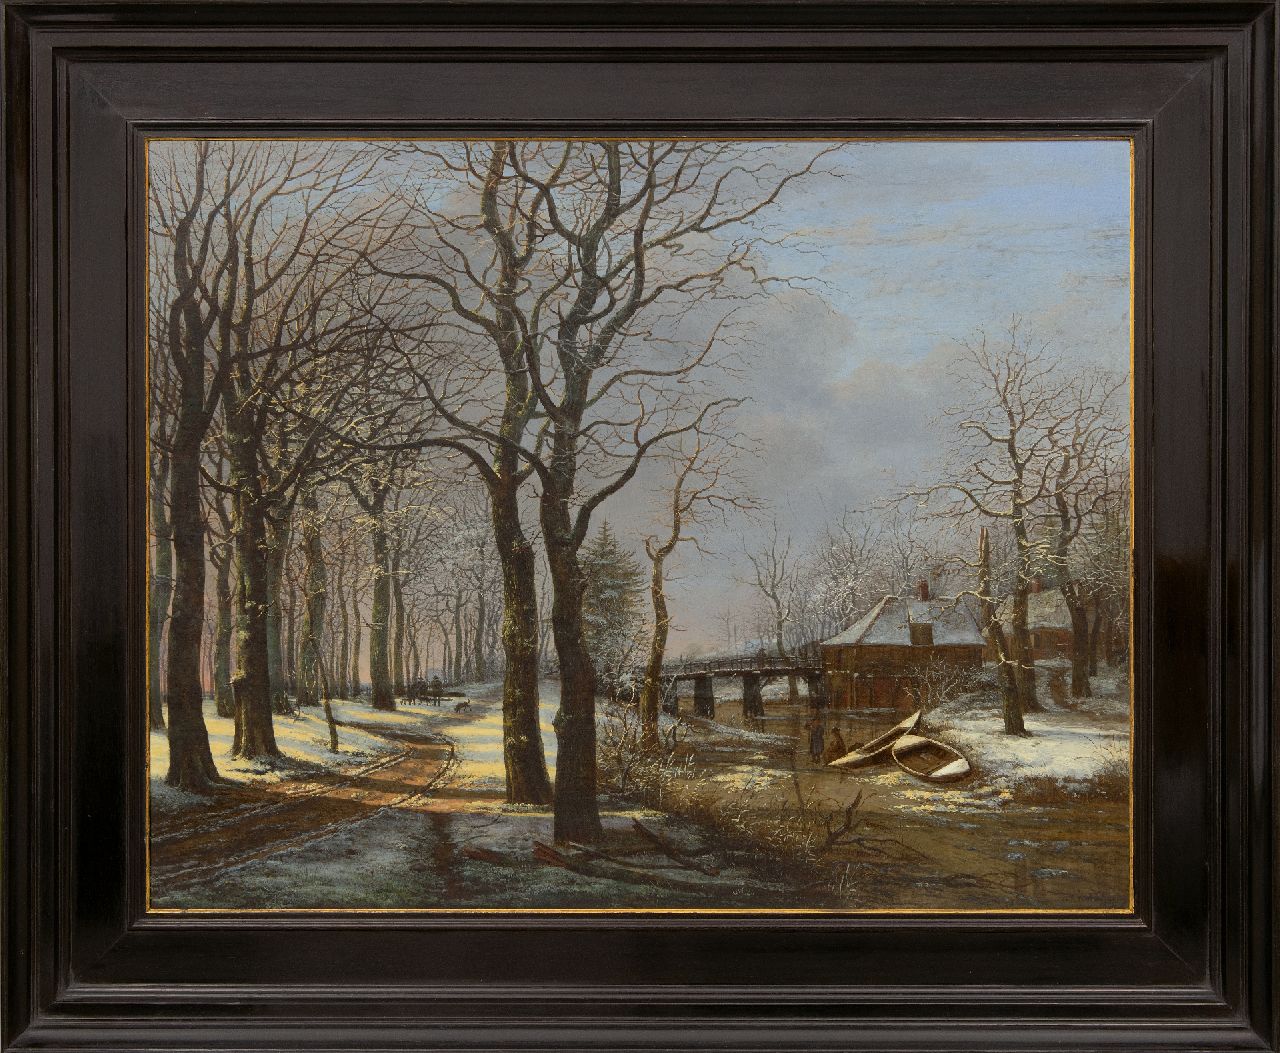 Westenberg G.P.  | George Pieter Westenberg | Paintings offered for sale | Woodlandscape with treelane in the snow, oil on canvas 63.8 x 80.8 cm, signed l.r. and dated 1821